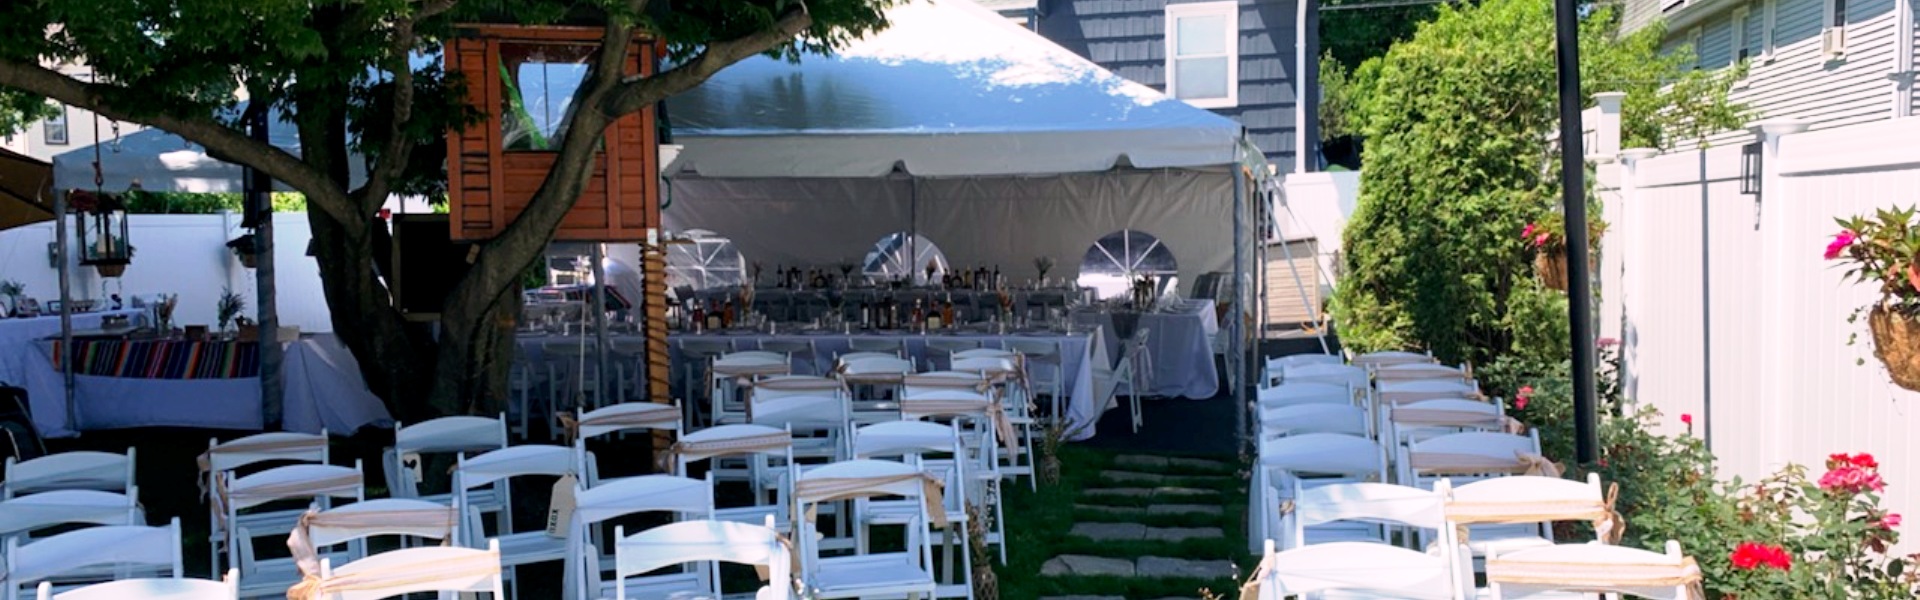 Tent Rental in Port Chester